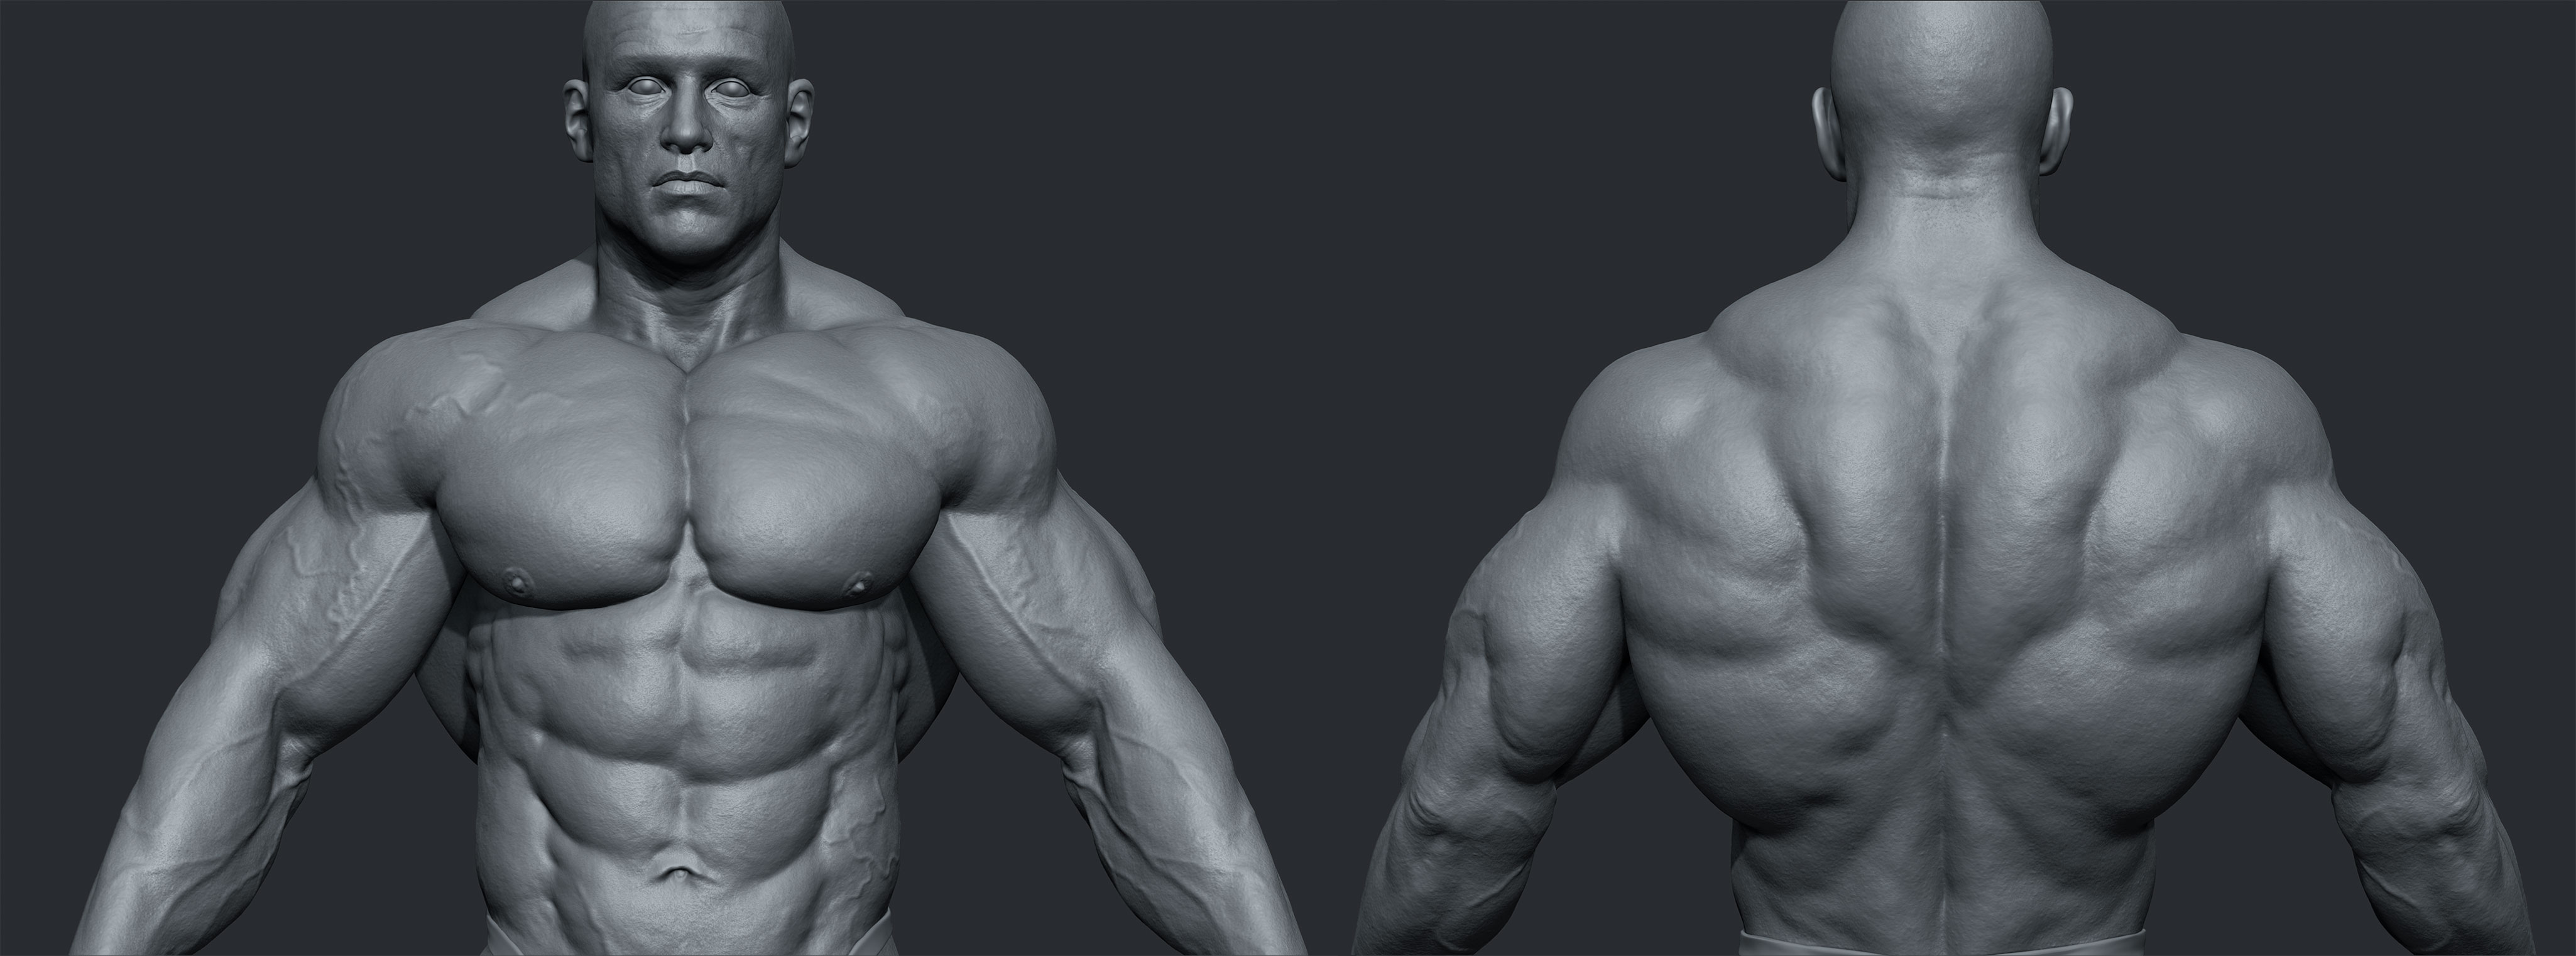 male body zbrush download